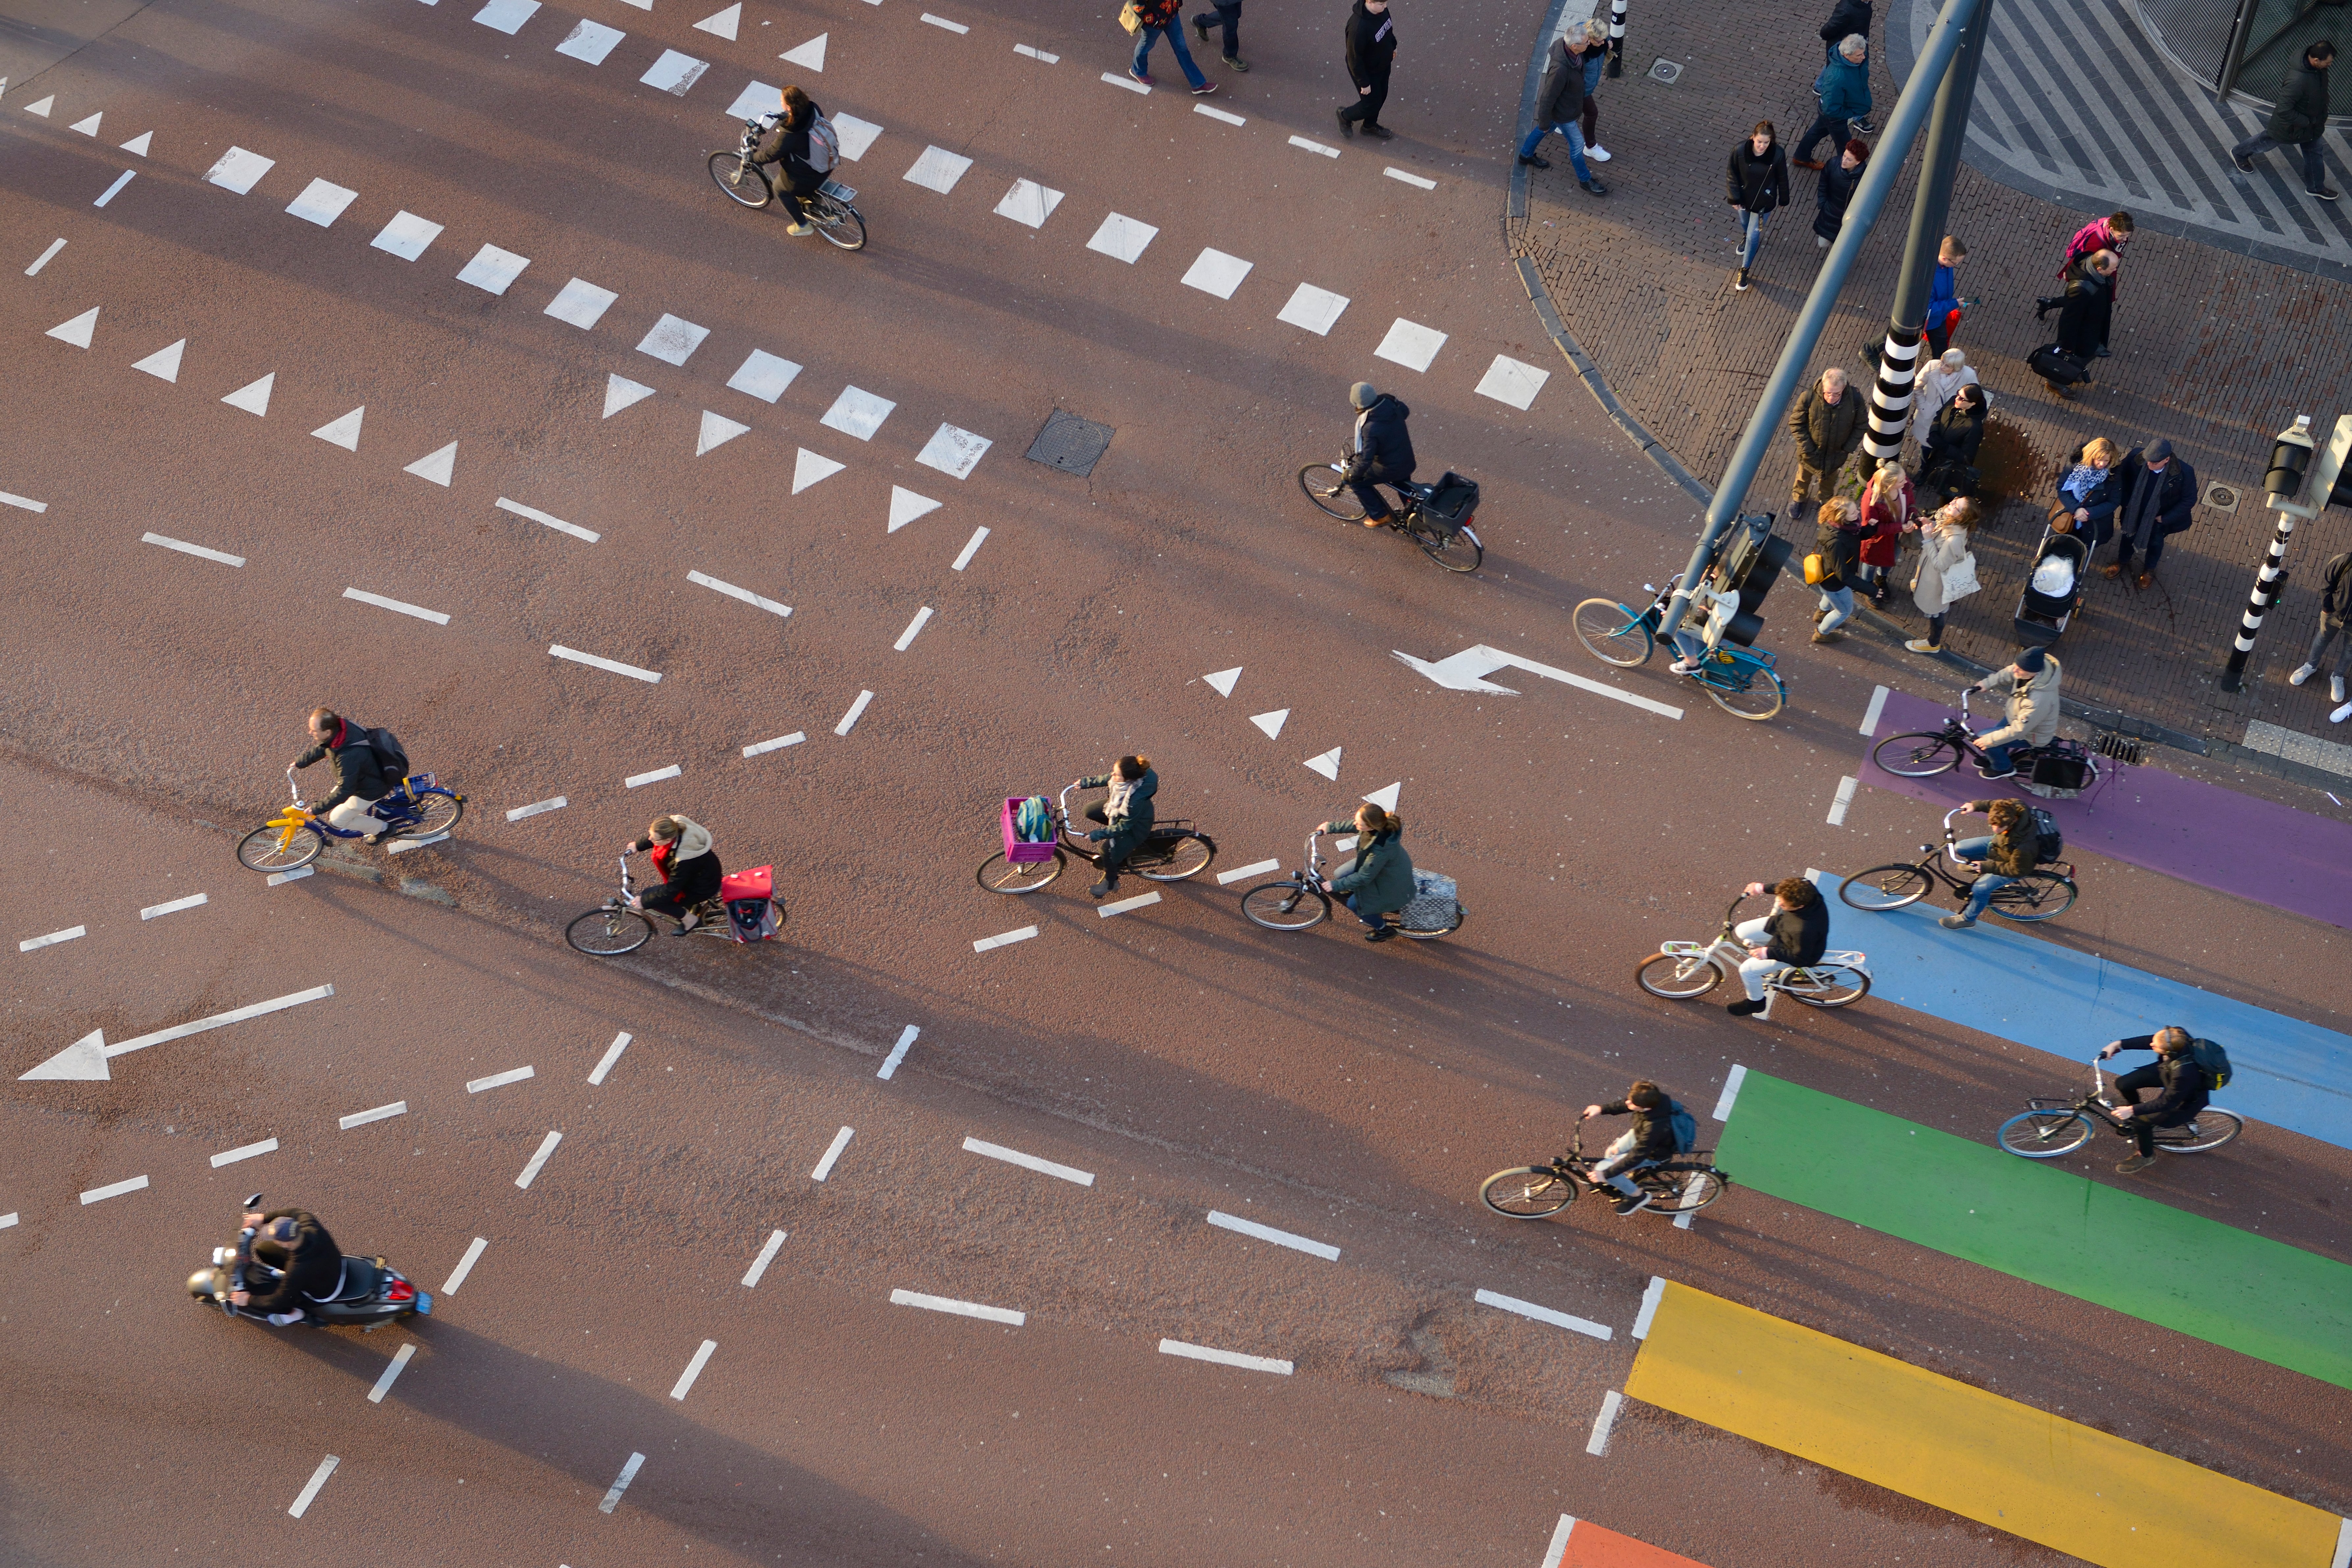 Utrecht is a utopia for new city cyclists